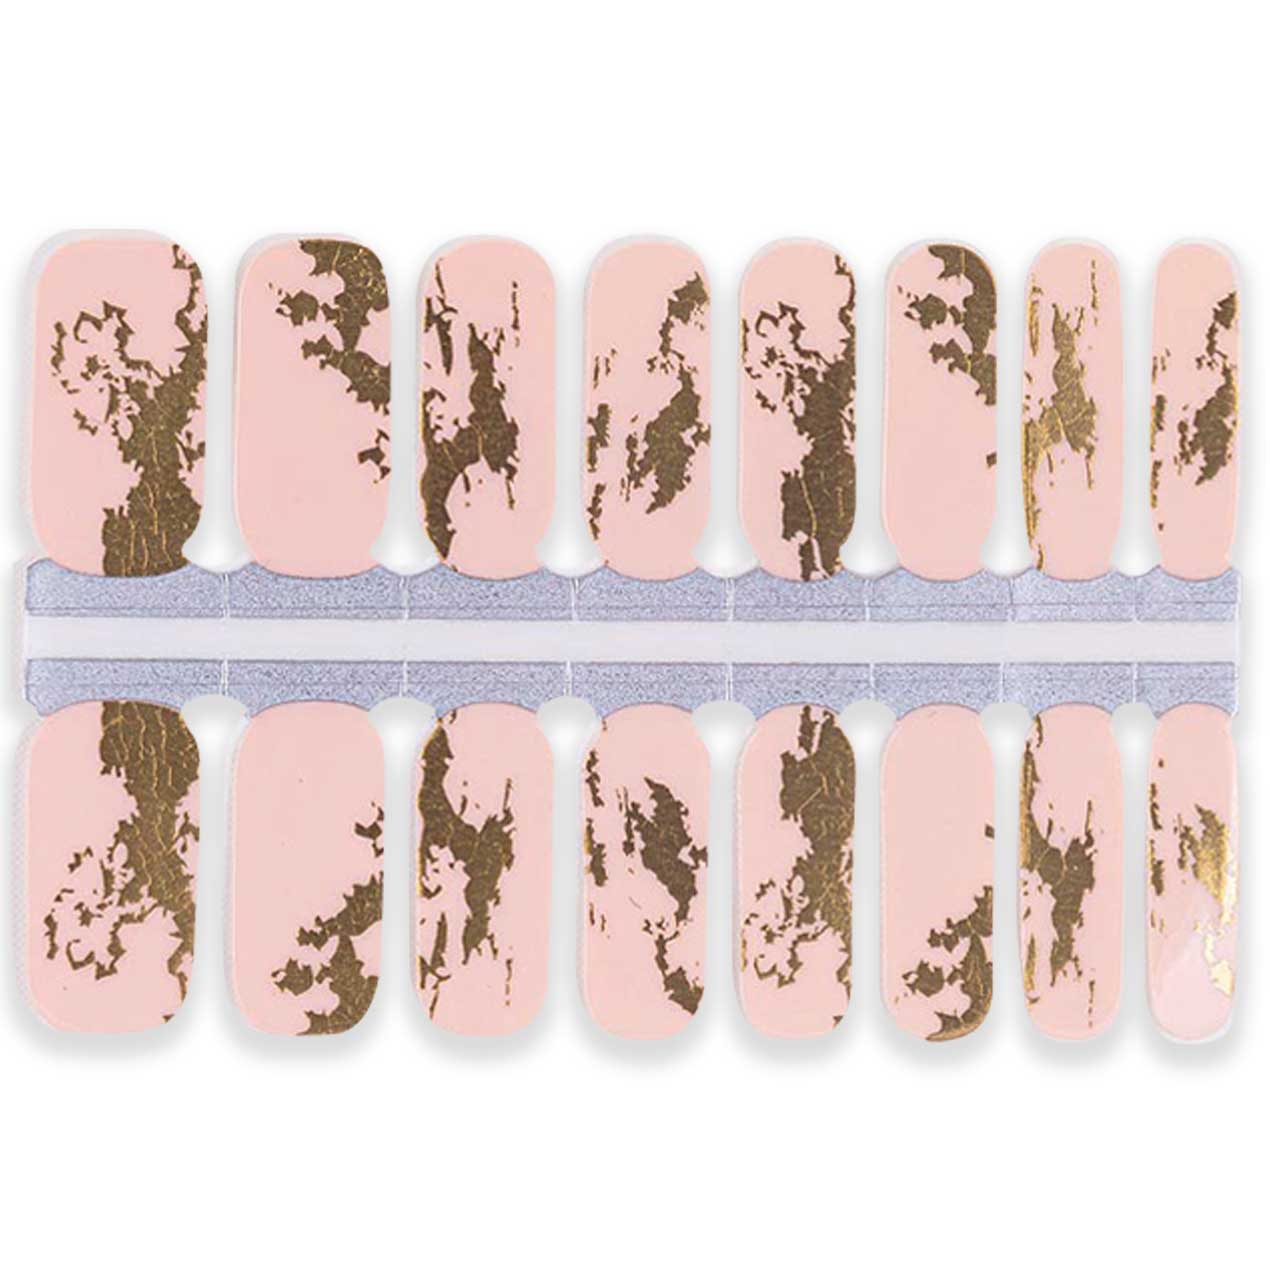 nail stickers online